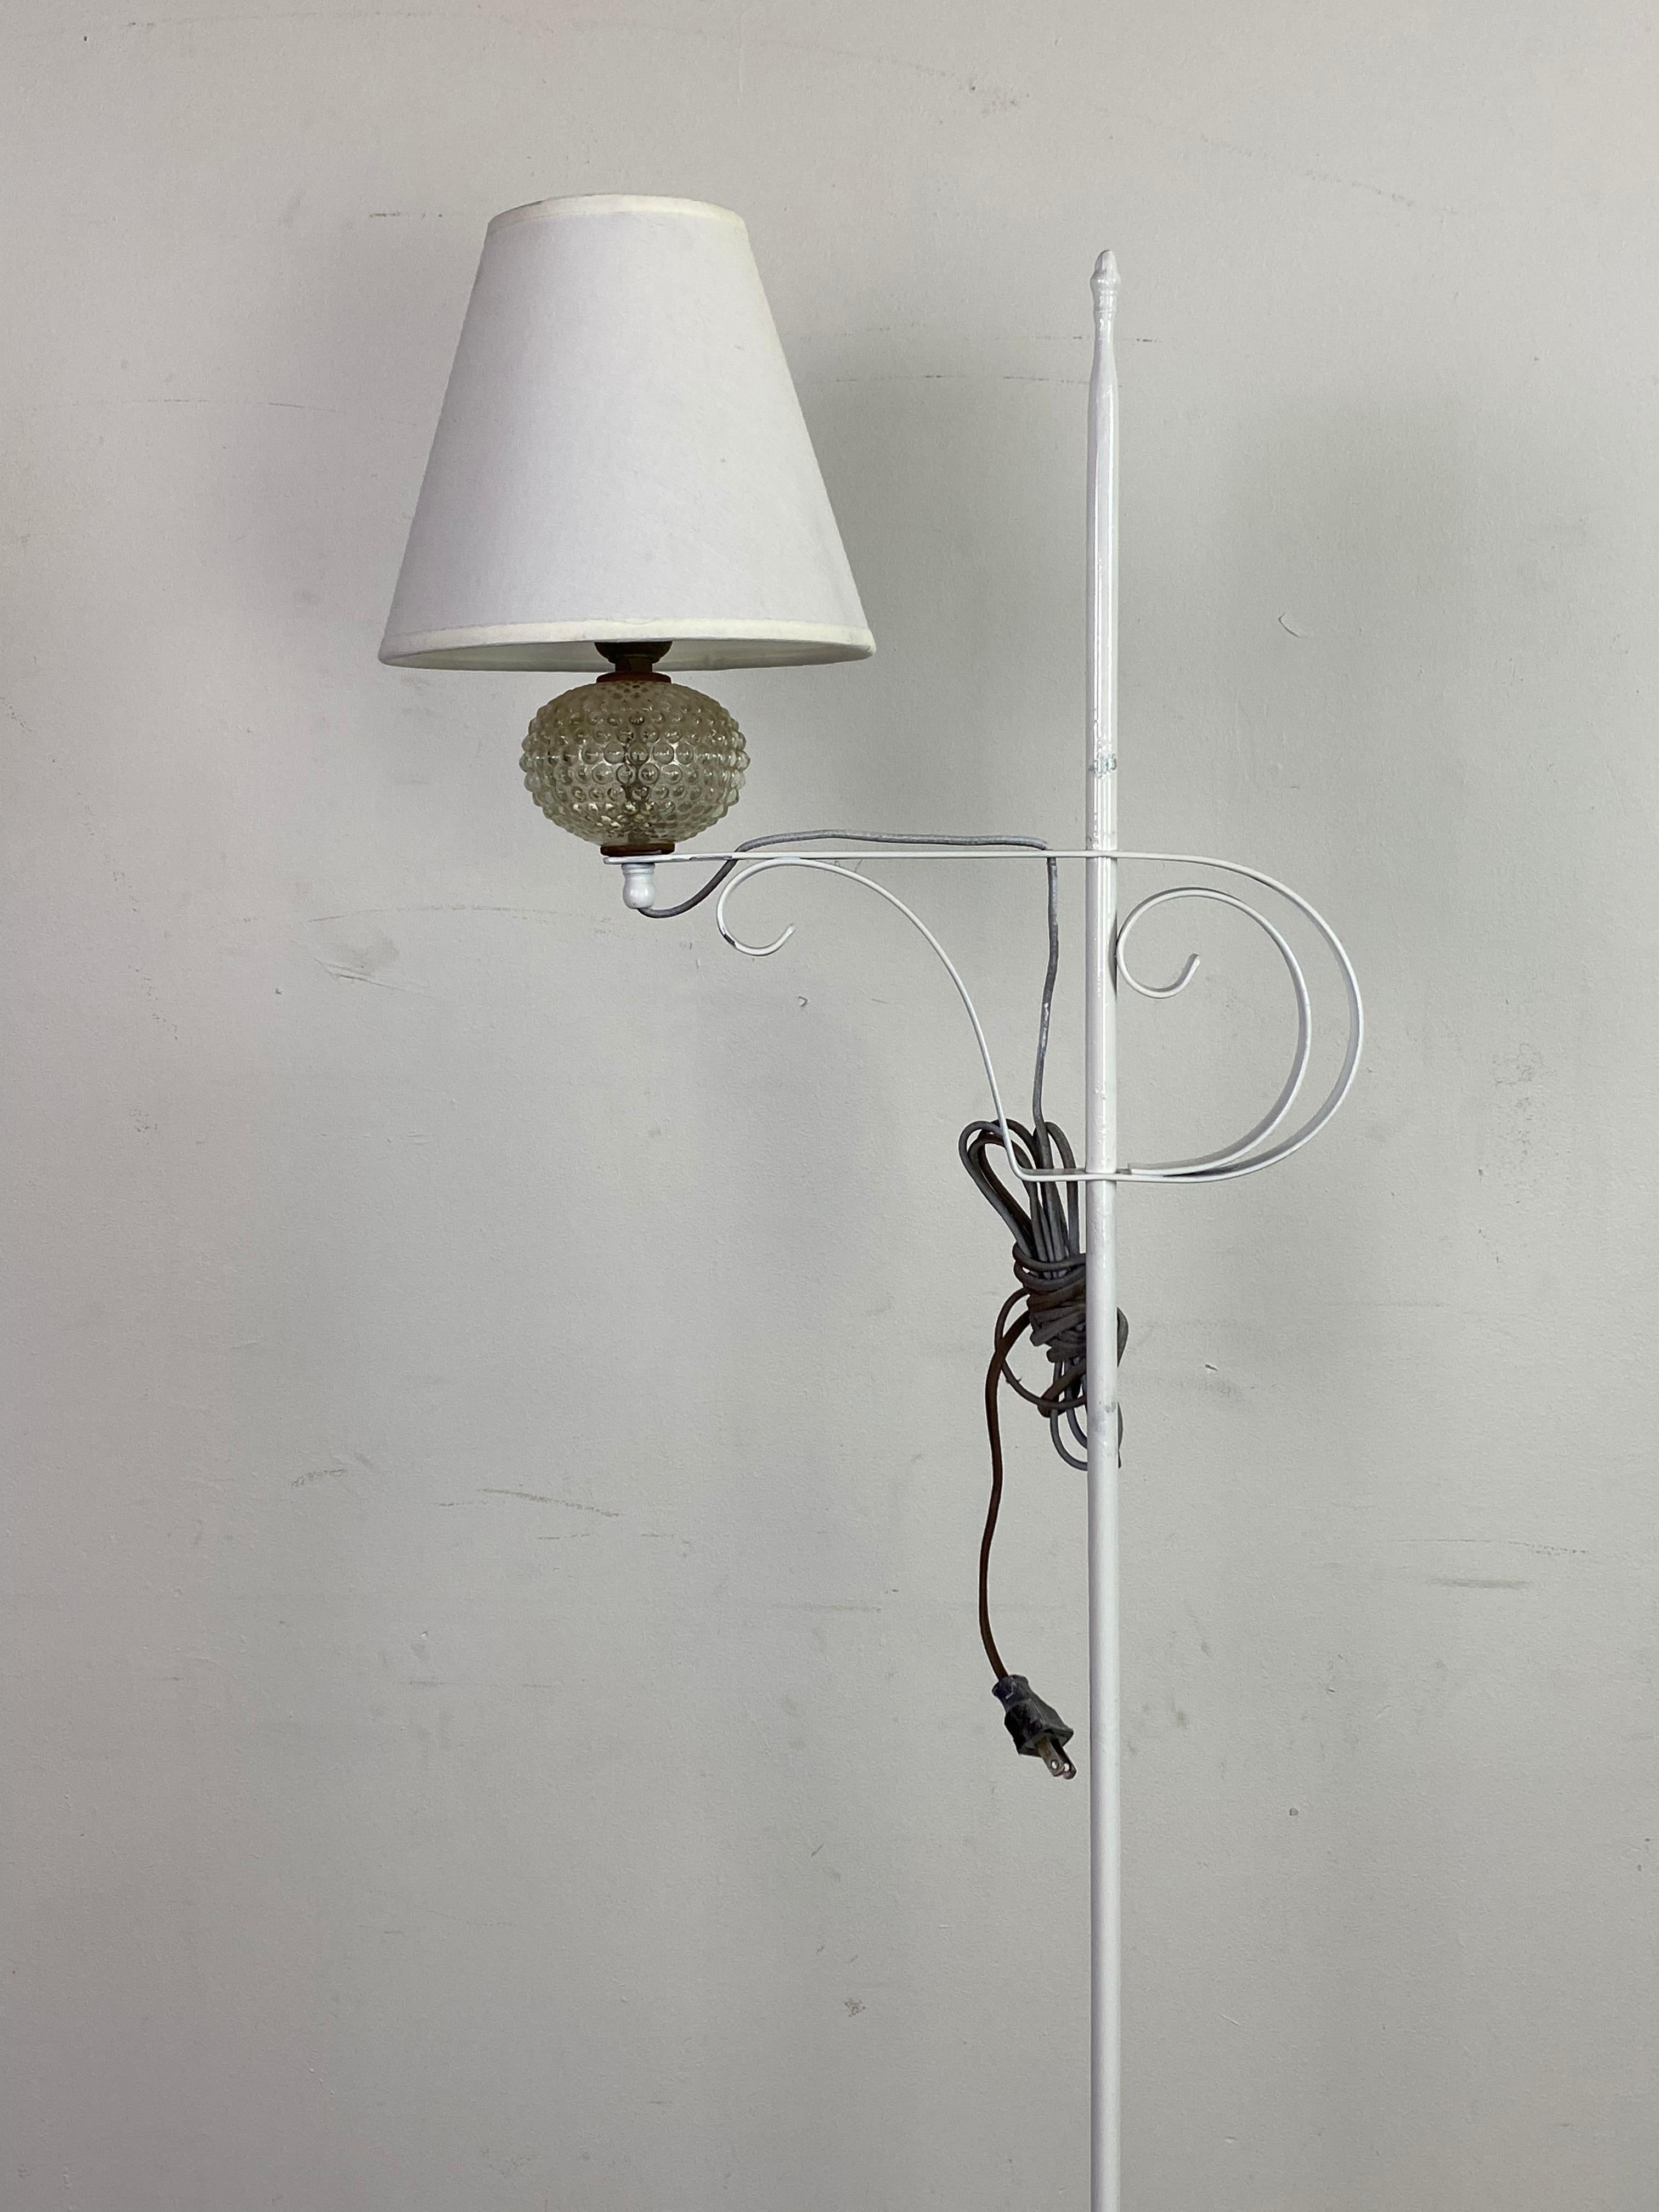 Elegant and clean wrought iron bridge floor lamp, recoated in white and outfitted with new shade. Accommodates modern style LED bulbs too. Recoated white.